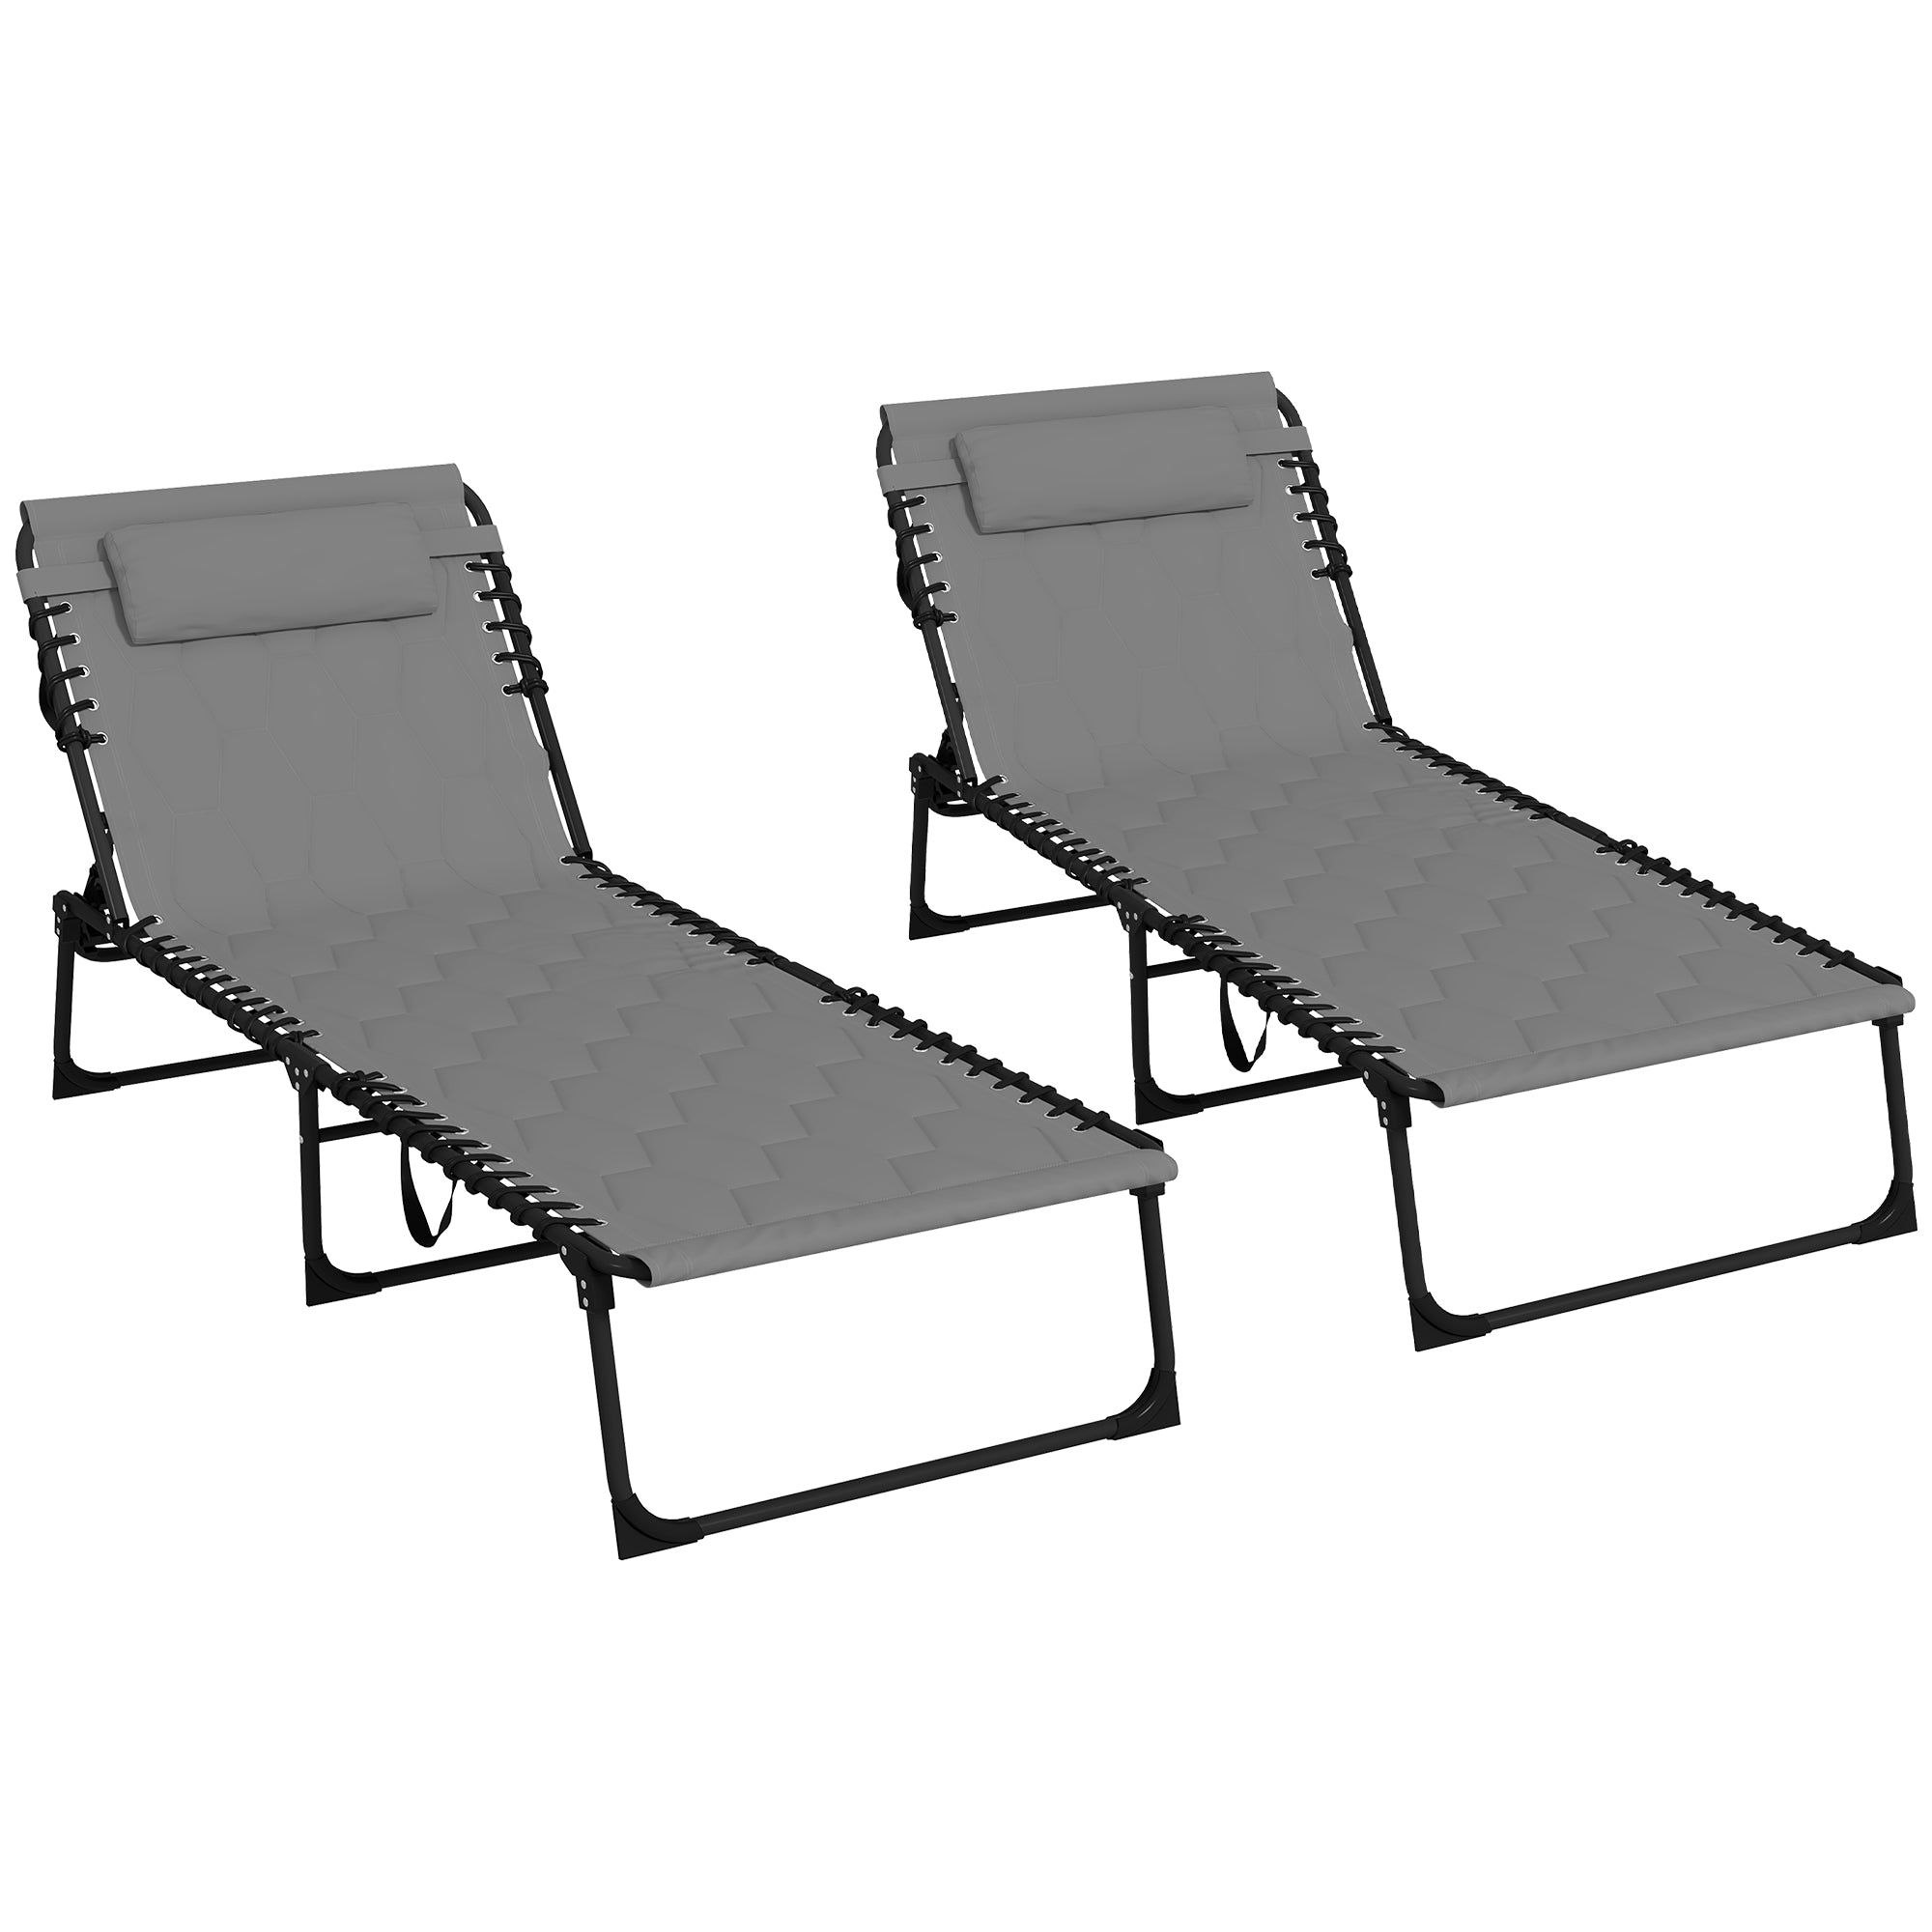 Outsunny Foldable Sun Lounger Set with 5-level Reclining Back, Outdoor Tanning Chairs w/ Padded Seat, Outdoor Sun Loungers with Side Pocket